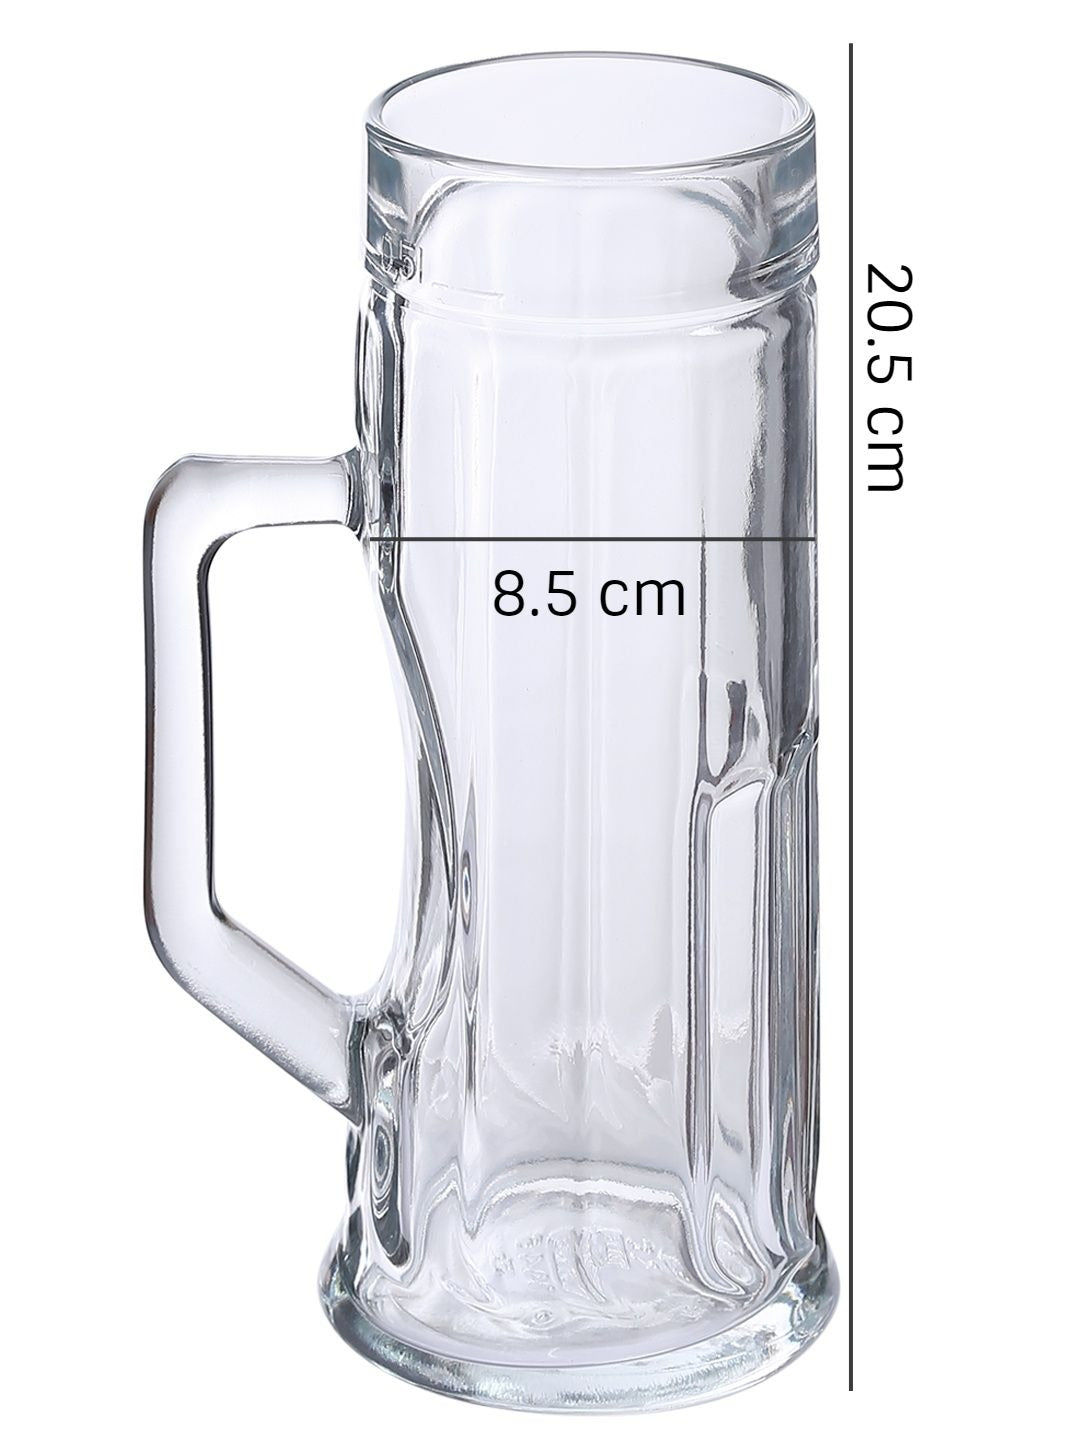 Dimensions of Versatile Drinkware Collection - Ideal for serving beer and other beverages.